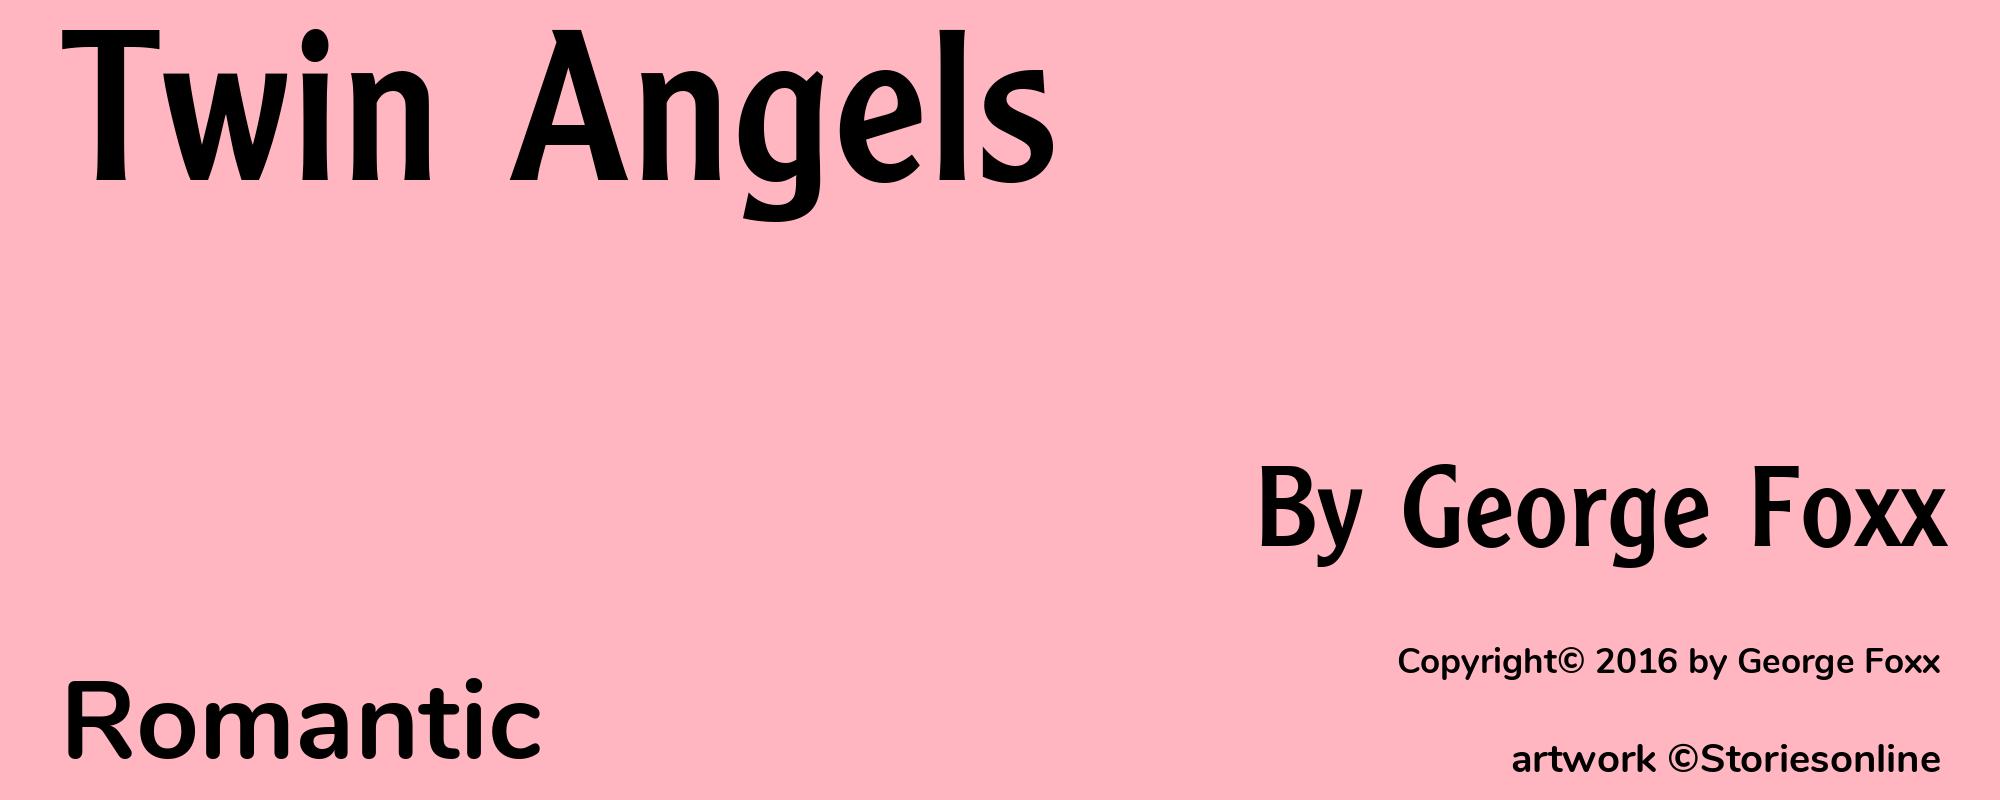 Twin Angels - Cover